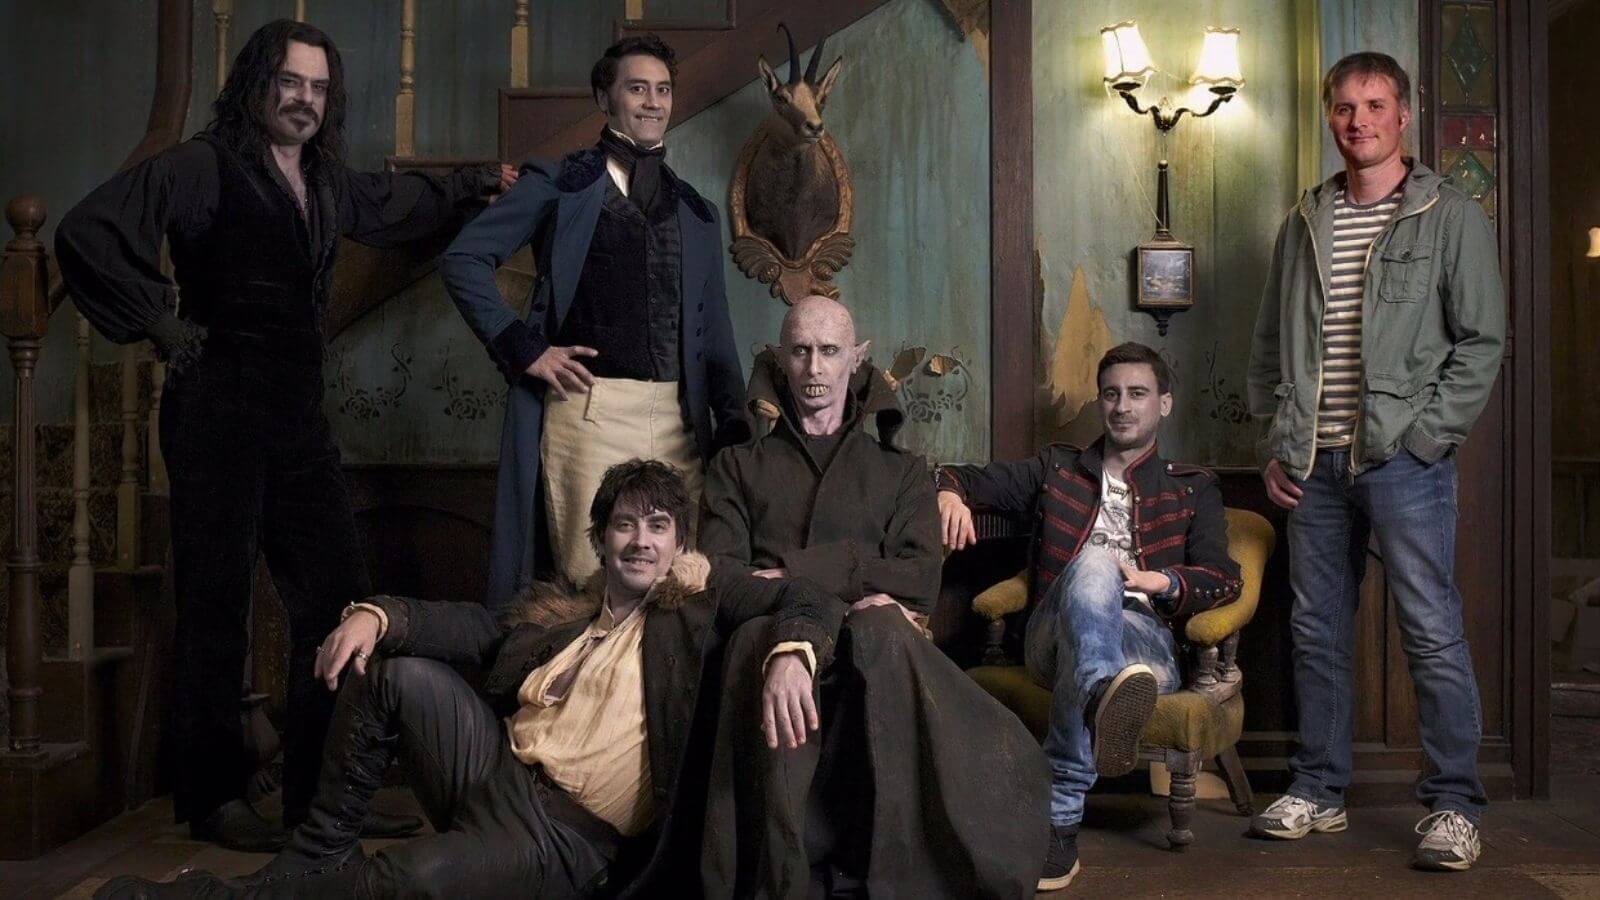 What We Do In The Shadows (Όσα κάνουμε στις σκιές) Review